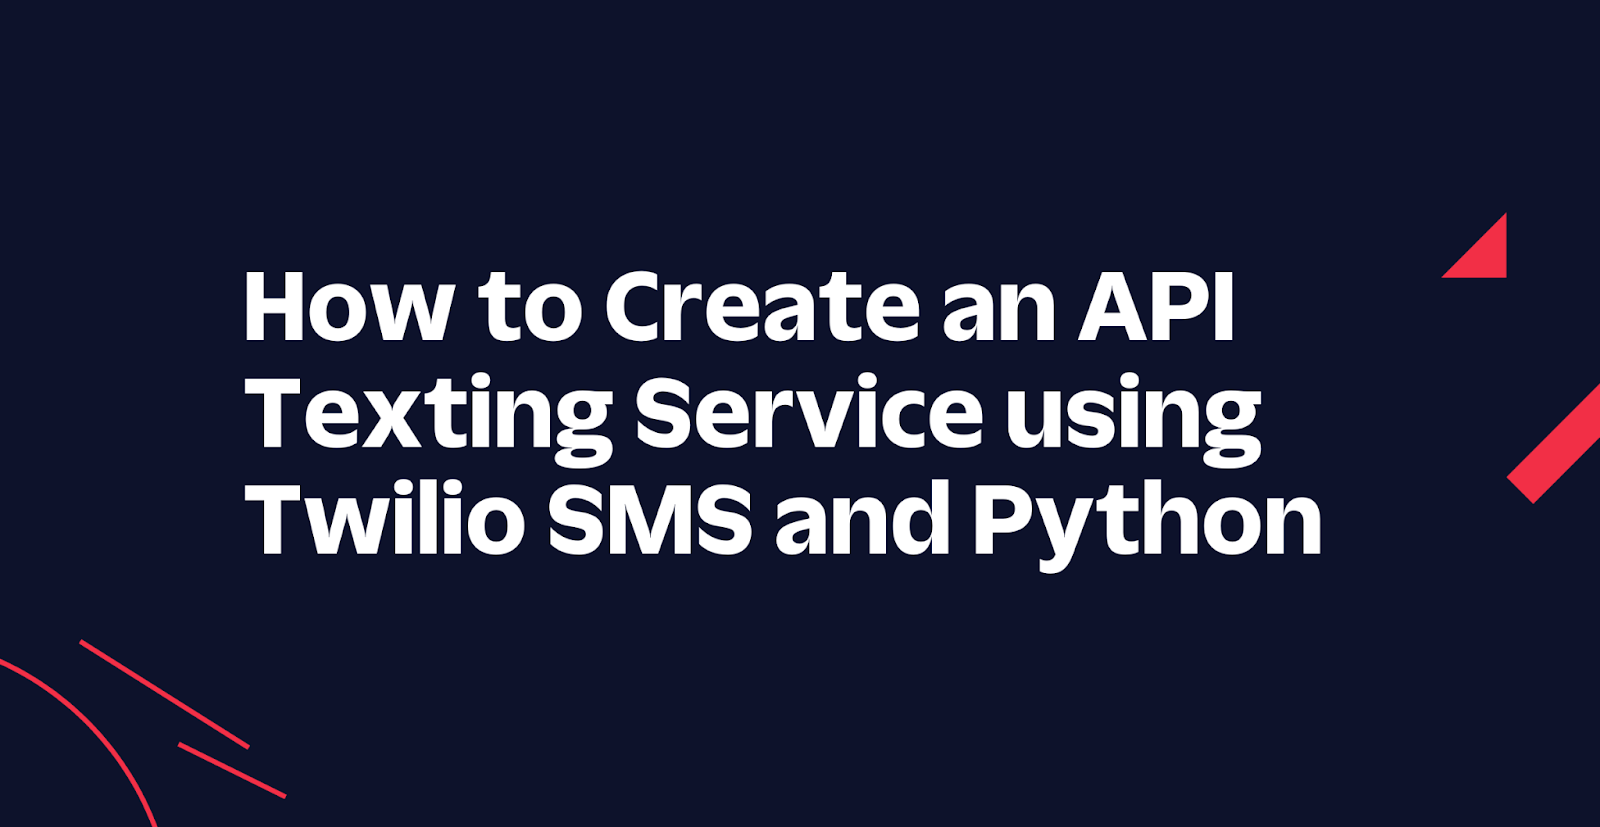 How to Create an API Texting Service using Twilio SMS and Python